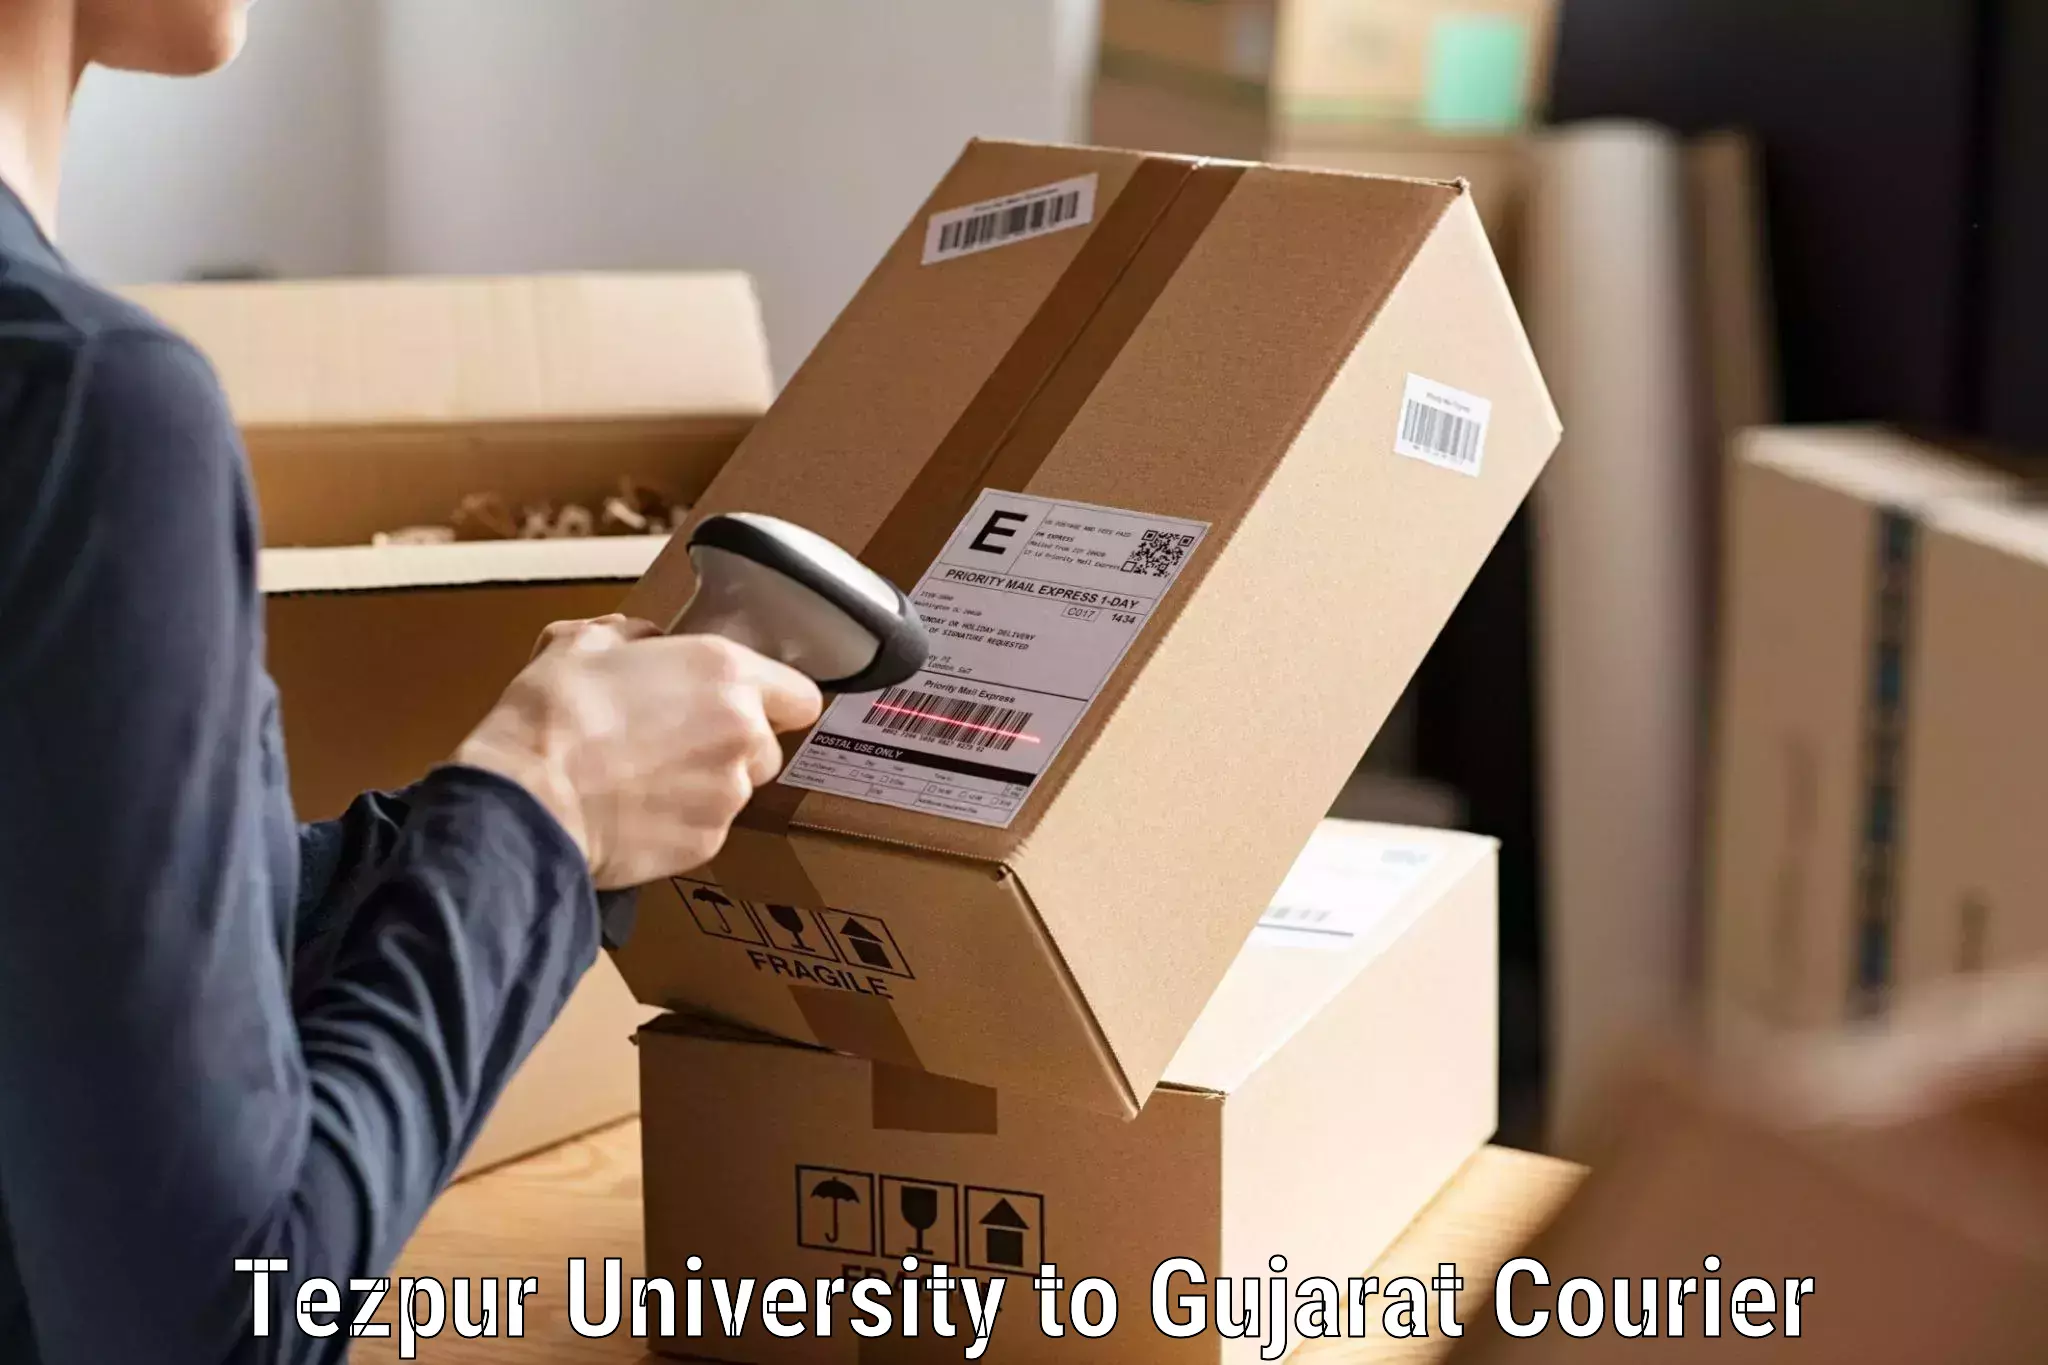 Quality courier partnerships in Tezpur University to Amreli